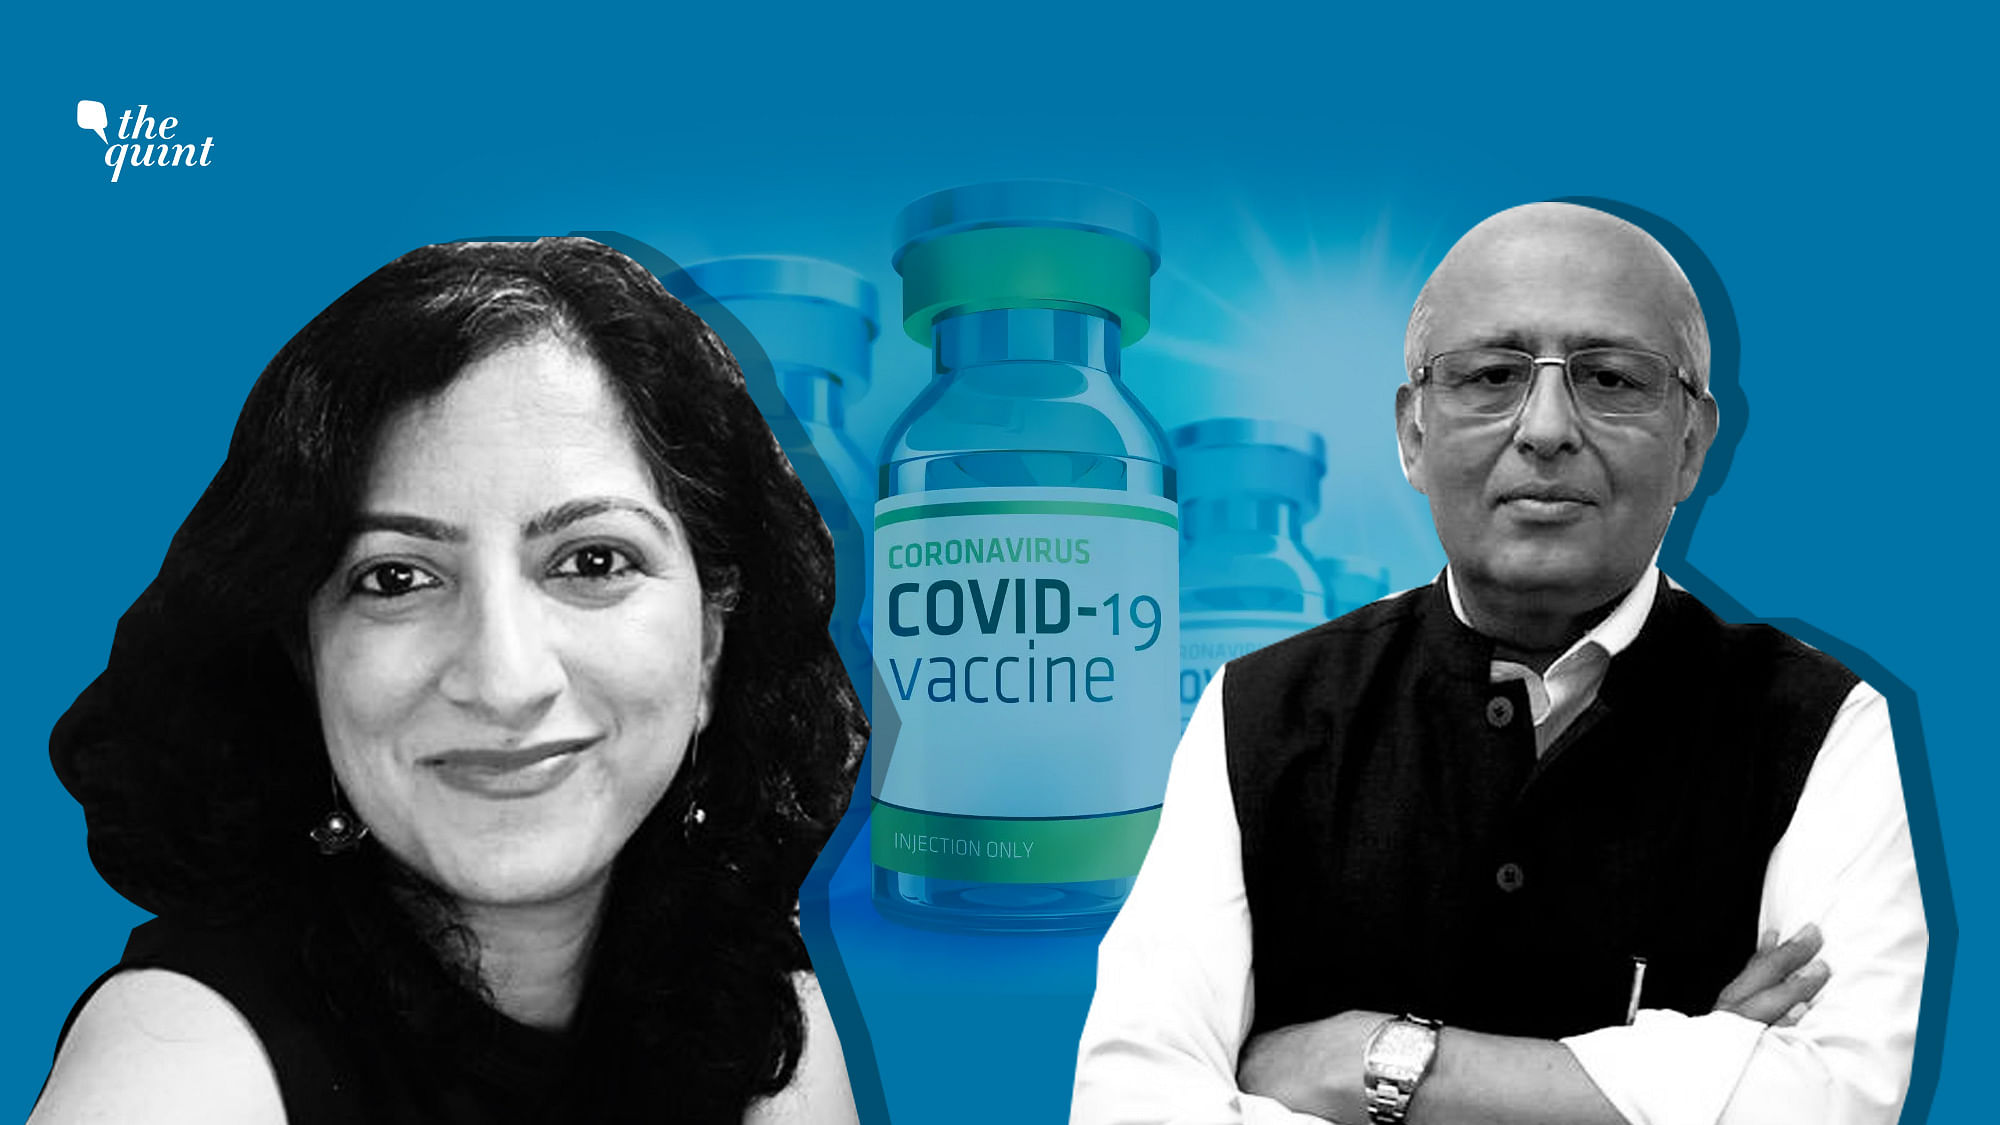 The Quint’s Health Editor Vaishali Sood, along with Dr Shahid Jameel, answers your questions on COVID vaccines.